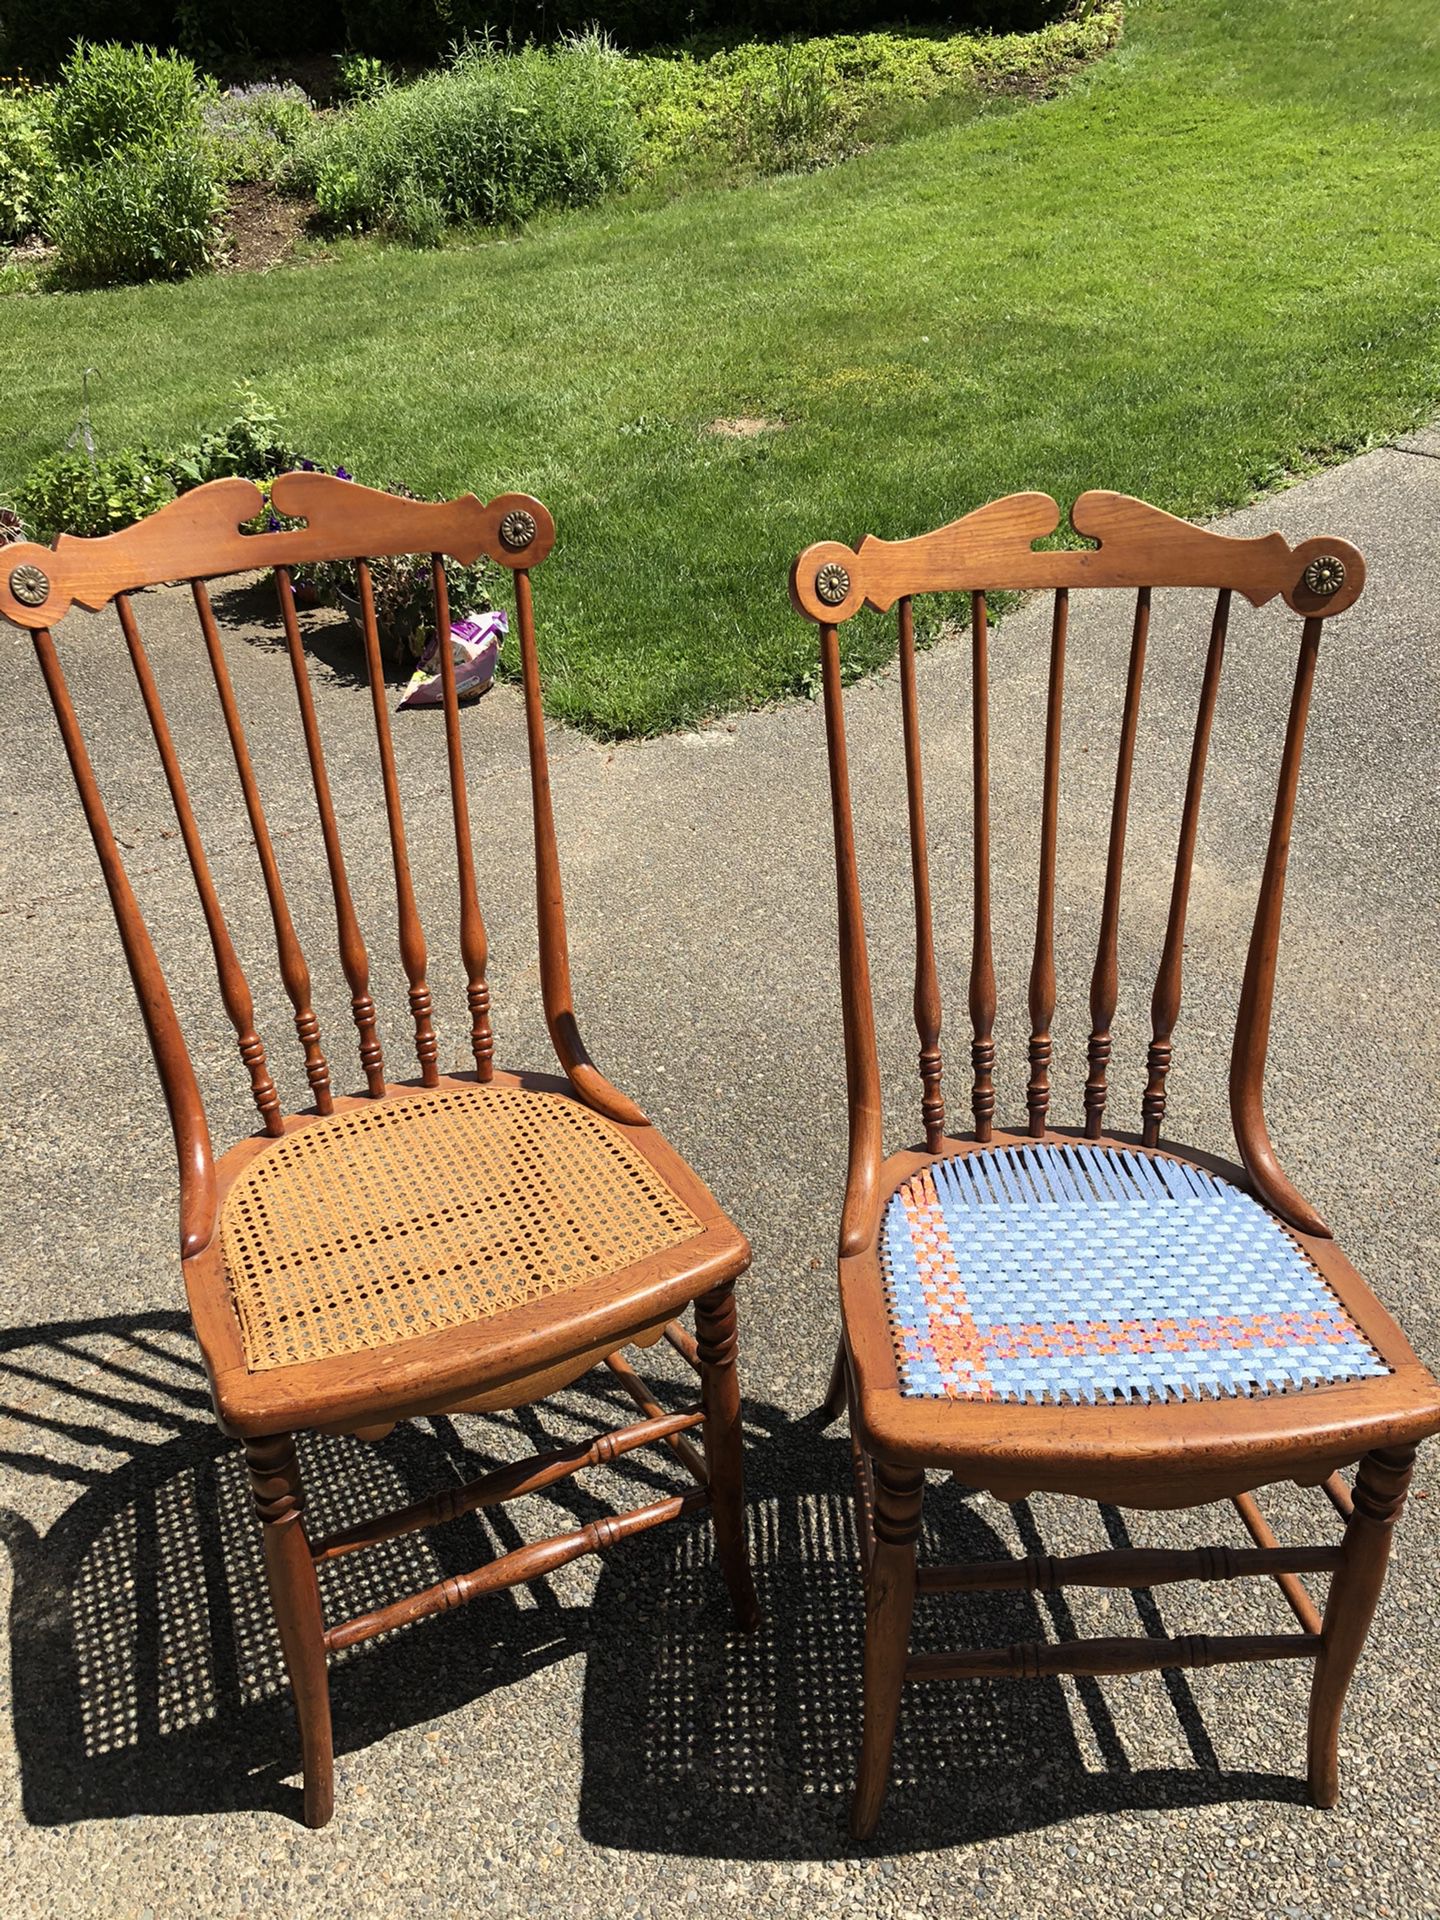 Antique chairs(1800 s ?)